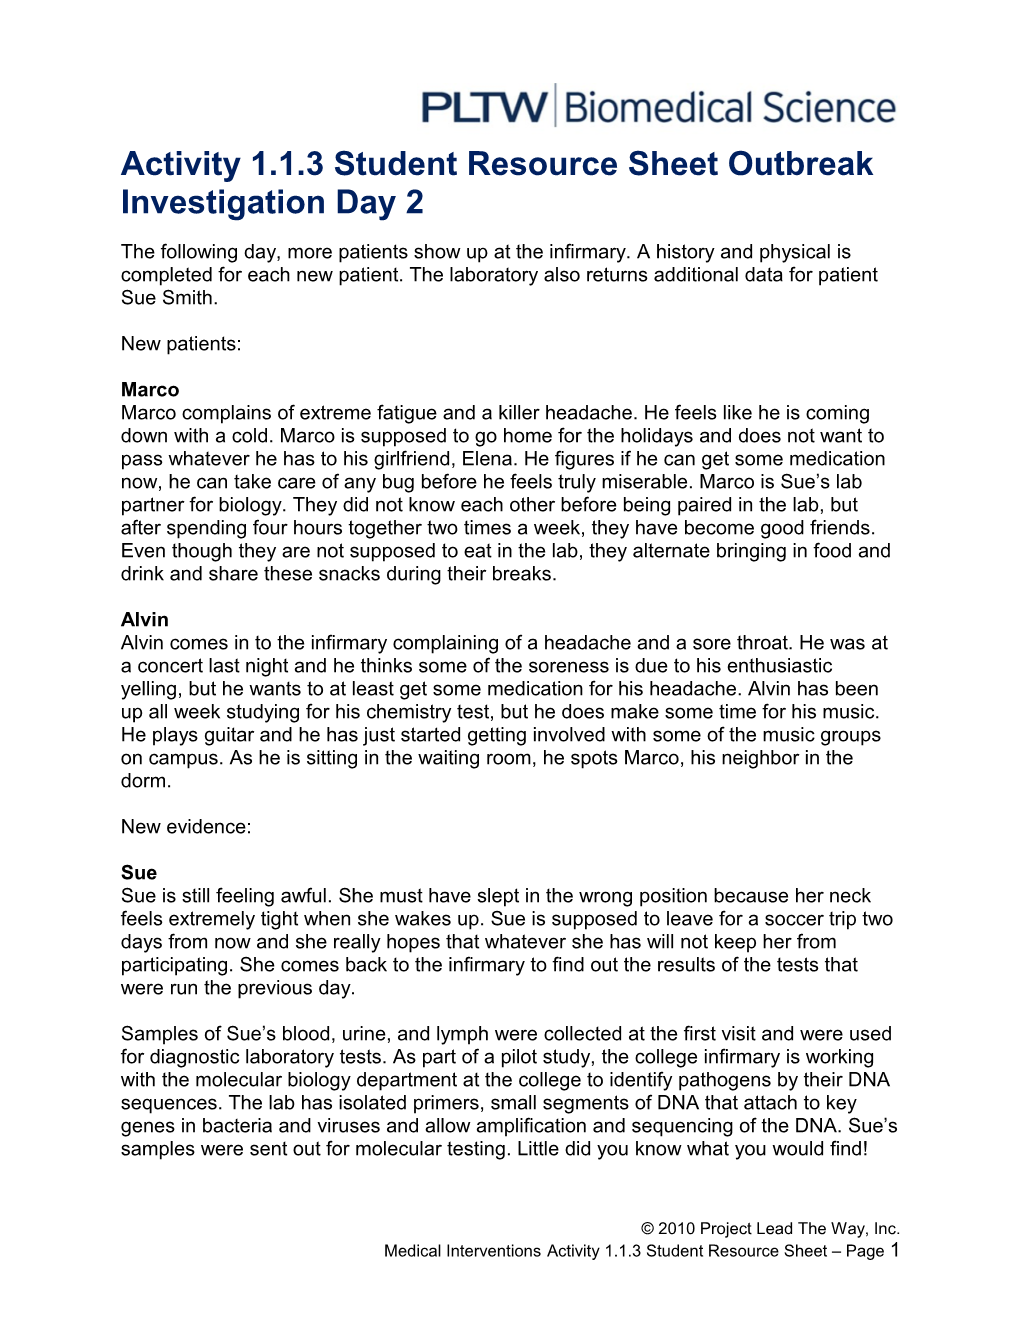 Activity 1.1.3 Student Resource Sheet Outbreak Investigation Day 2